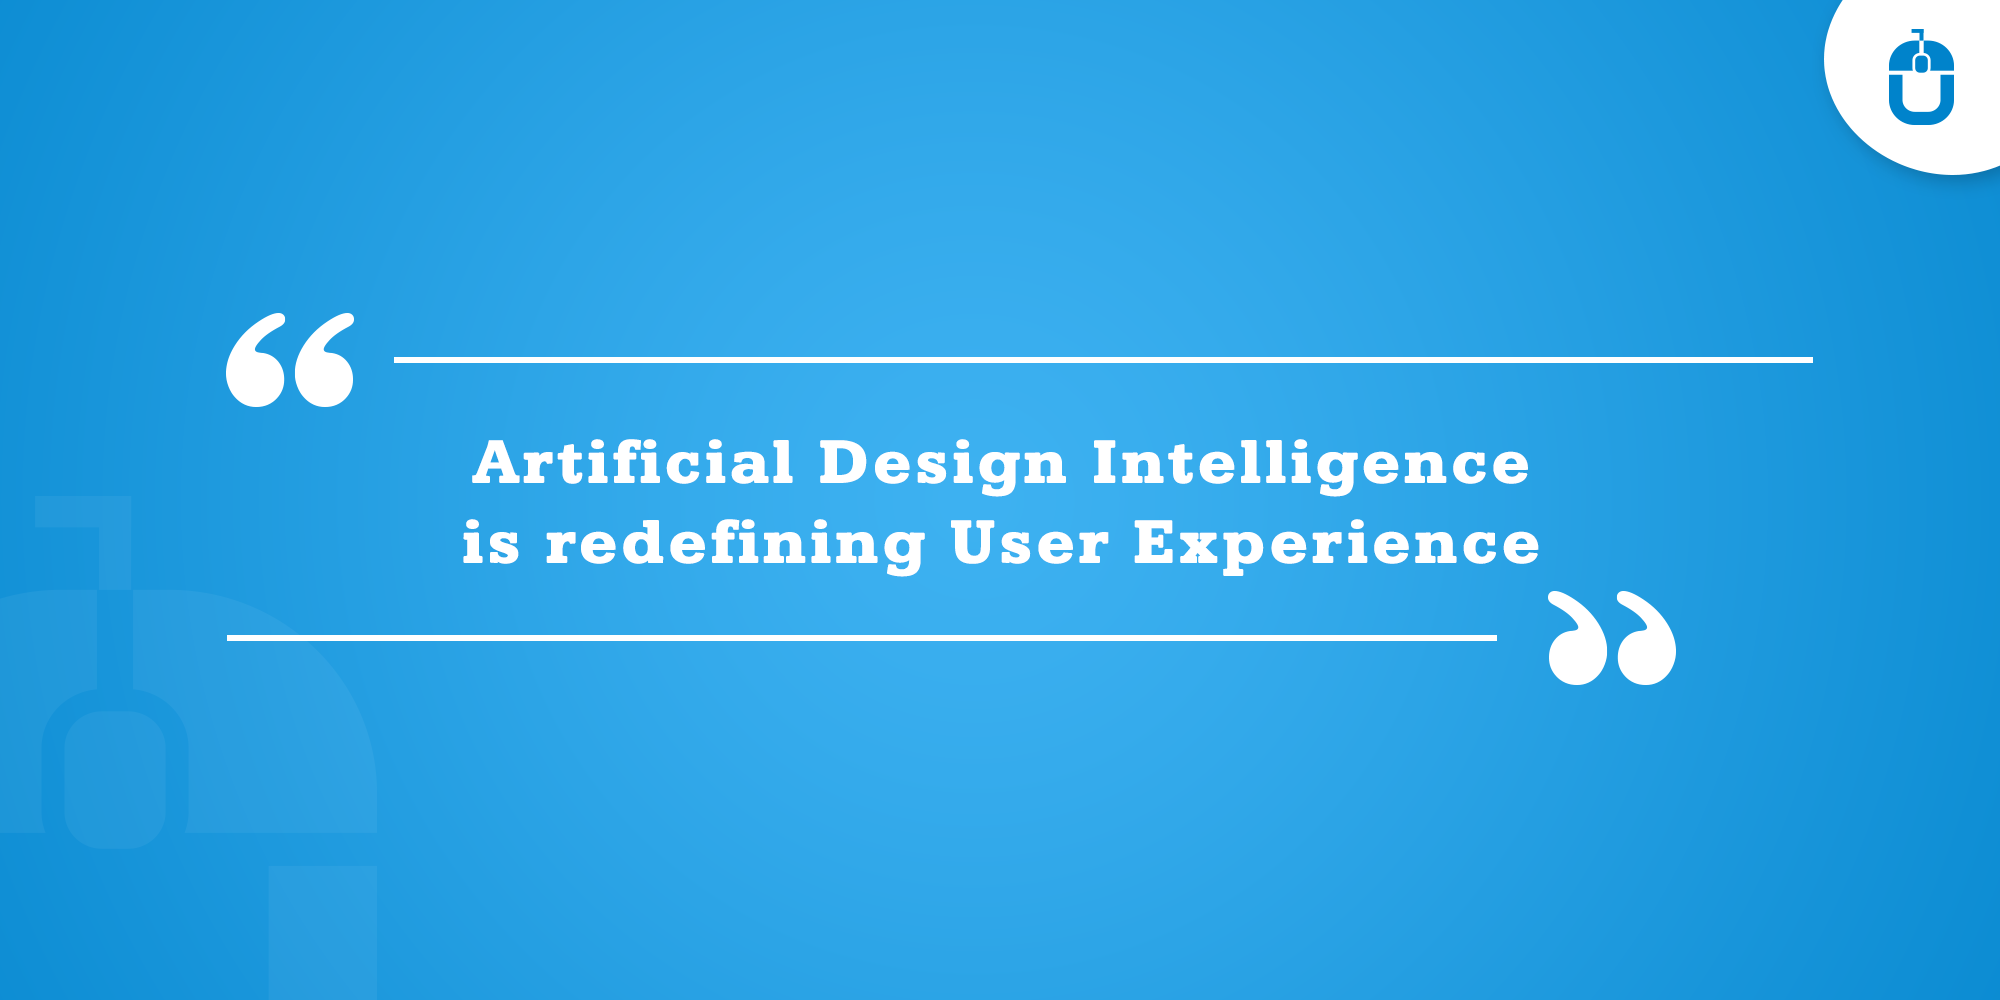 Artificial Design Intelligence Is Redefining User Experience